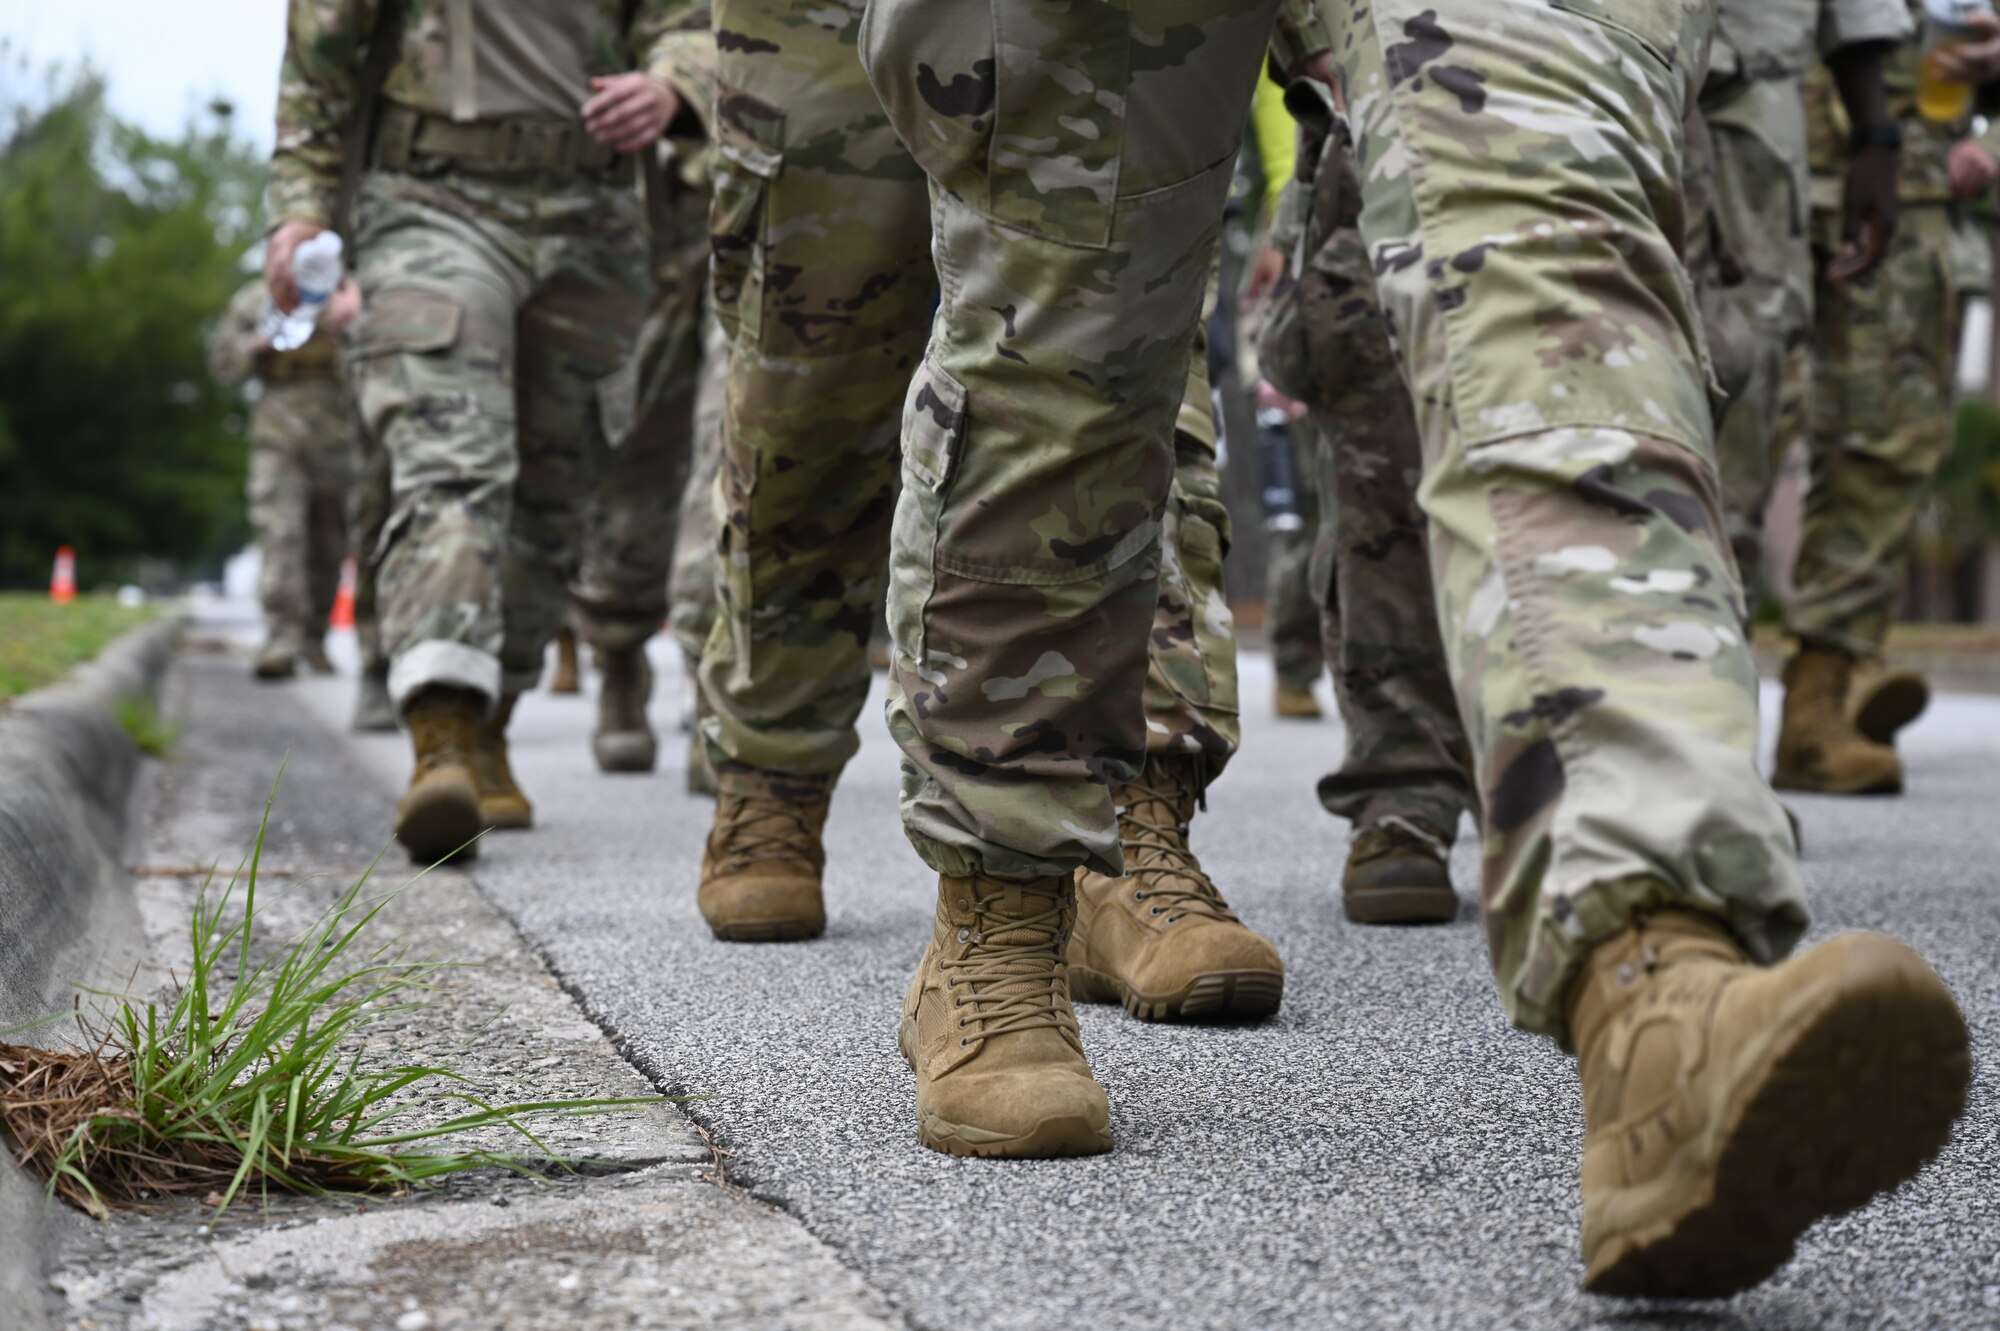 Members from the U.S. Air Force, U.S. Army, Royal Danish Air Force and other coalition partners participate in the Danish Contingency (DANCON) ruck march at Shaw Air Force Base, S.C., June 5, 2021. Traditionally, RDAF members host 25KM (15.5 miles) DANCON ruck marches at the conclusion of team deployments in the Middle East and other locations around the globe. RDAF members recently deployed to Shaw Air Force Base to work side by side with Airmen from the 727 Expeditionary Air Control Squadron, “Kingpin,” and this event marks the first DANCON march held on U.S. soil.